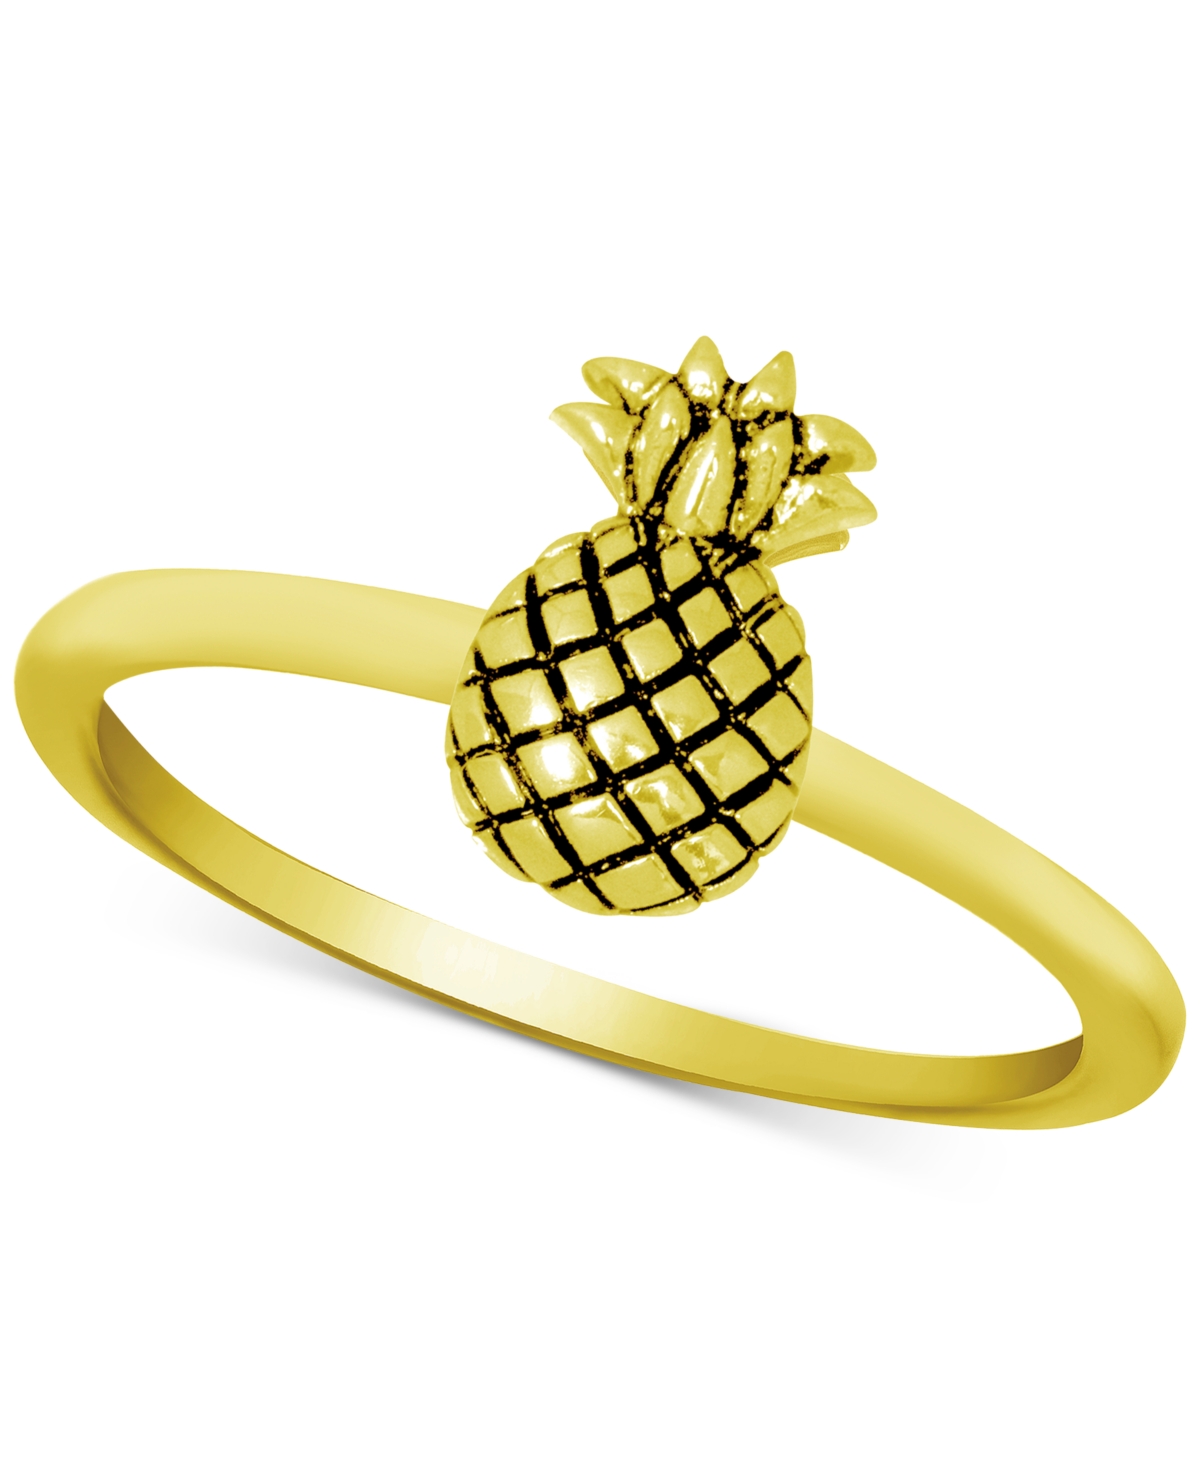 Pineapple Ring in Gold-Plate - Gold